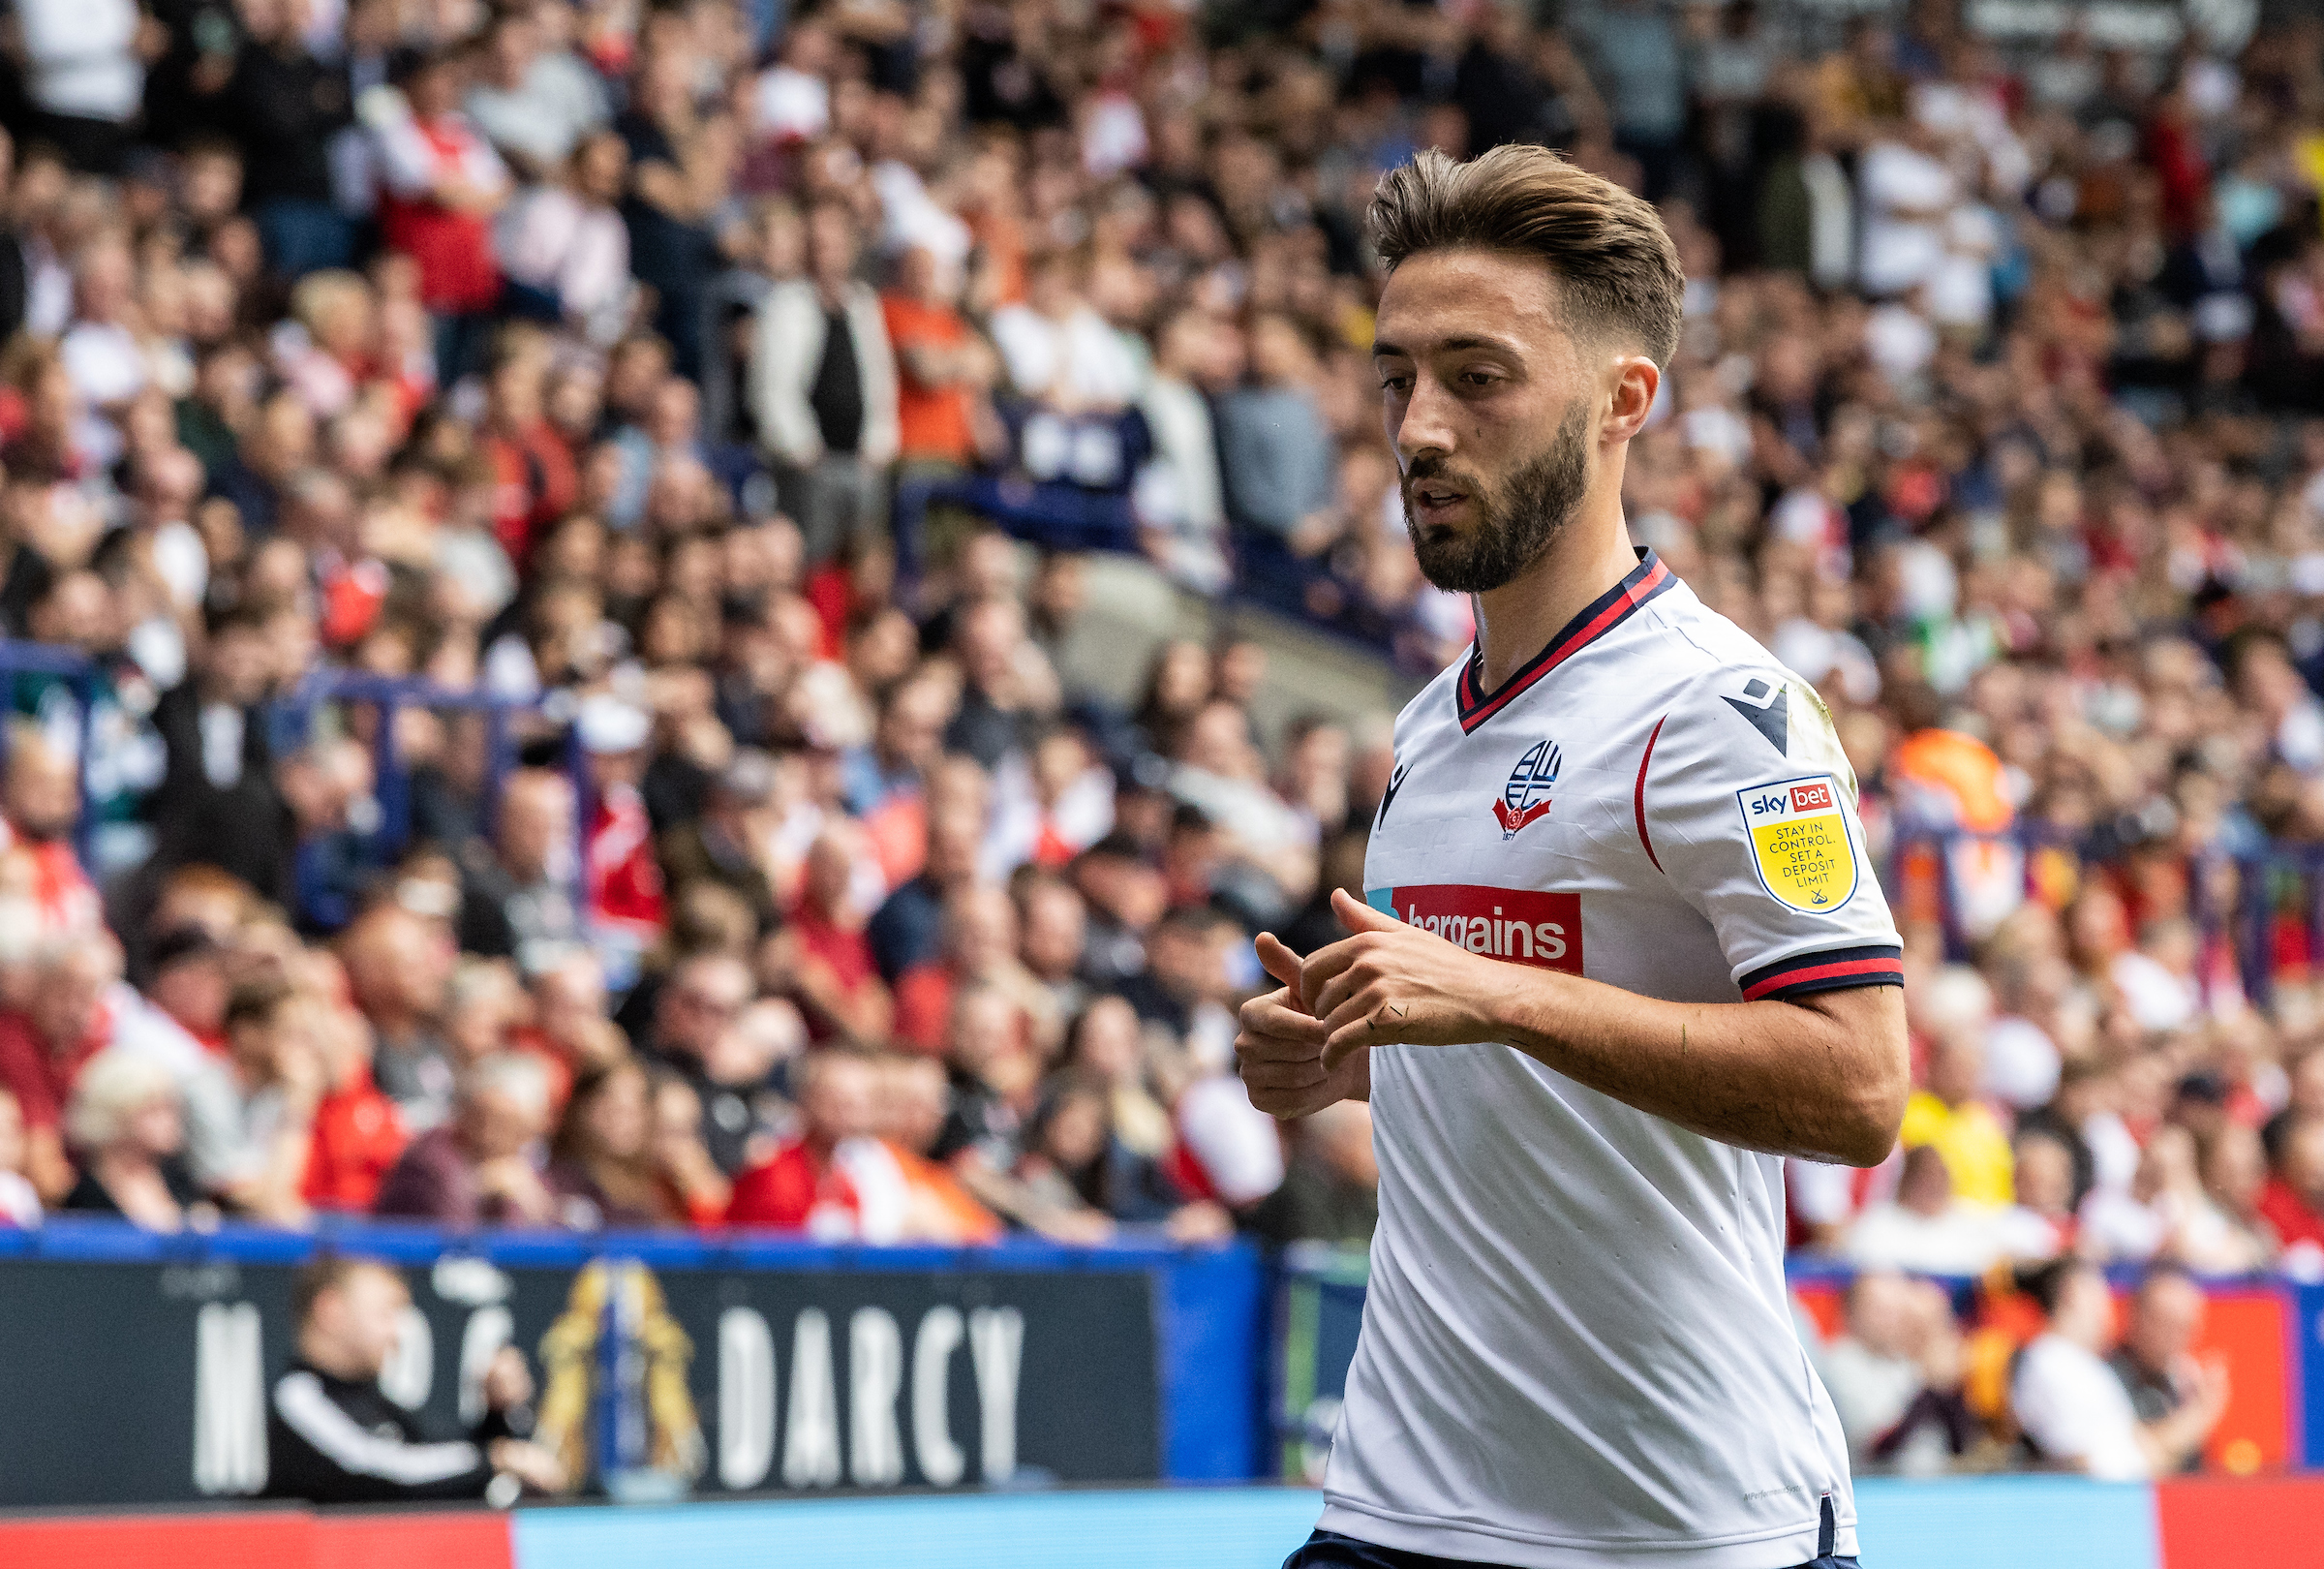 Bolton Wanderers midfielder Josh Sheehan opens up about his recovery from injury